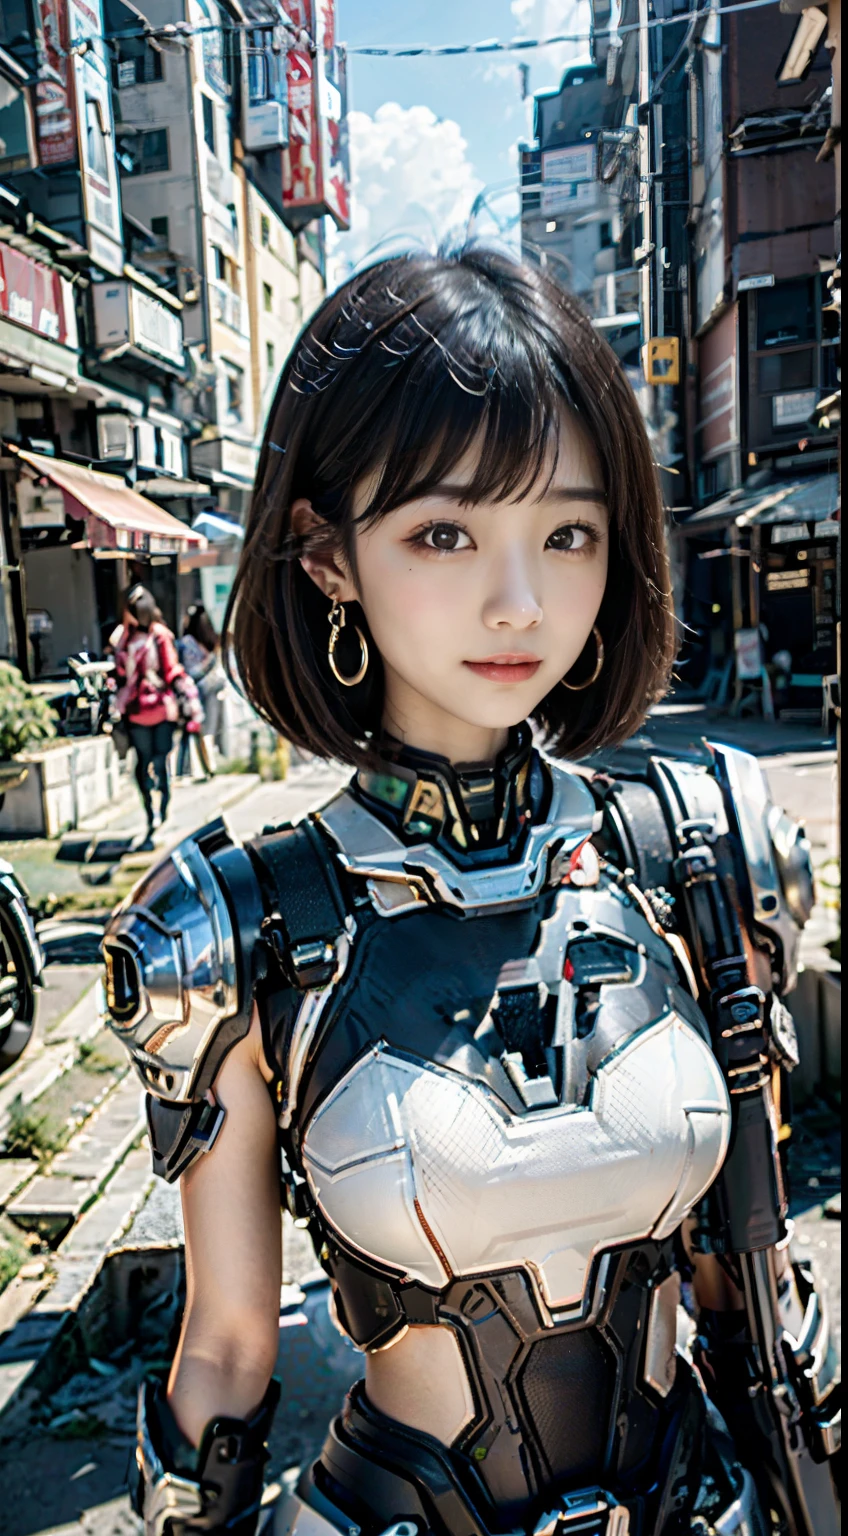 ((Best quality)), ((masterpiece)), (highly detailed:1.3), 3D, Shitu-mecha, beautiful cyberpunk women with her mecha in the ruins of city from a forgoten war, ancient technology,HDR (High Dynamic Range),Ray Tracing,NVIDIA RTX,Super-Resolution,Unreal 5,Subsurface scattering,PBR Texturing,Post-processing,Anisotropic Filtering,Depth-of-field,Maximum clarity and sharpness,Multi-layered textures,Albedo and Specular maps,Surface shading,Accurate simulation of light-material interaction,Perfect proportions,Octane Render,Two-tone lighting,Low ISO,White balance,Rule of thirds,Wide aperature, 8K RAW,Efficient Sub-Pixel, sub-pixel convolution, luminescent particles, light scattering,Tyndall effect, (Japanese high school girl, surreal girl, idle face, 16 years old, affectionate cute, slim waist and large breasts style, short height, younger sister girl, round face, eyebrows downward, short bob cut, black hair, bangs, one earring, lively eyes, light blush, Look at viewers, Haruka Hukuhara:1.2), Look at viewer, smile